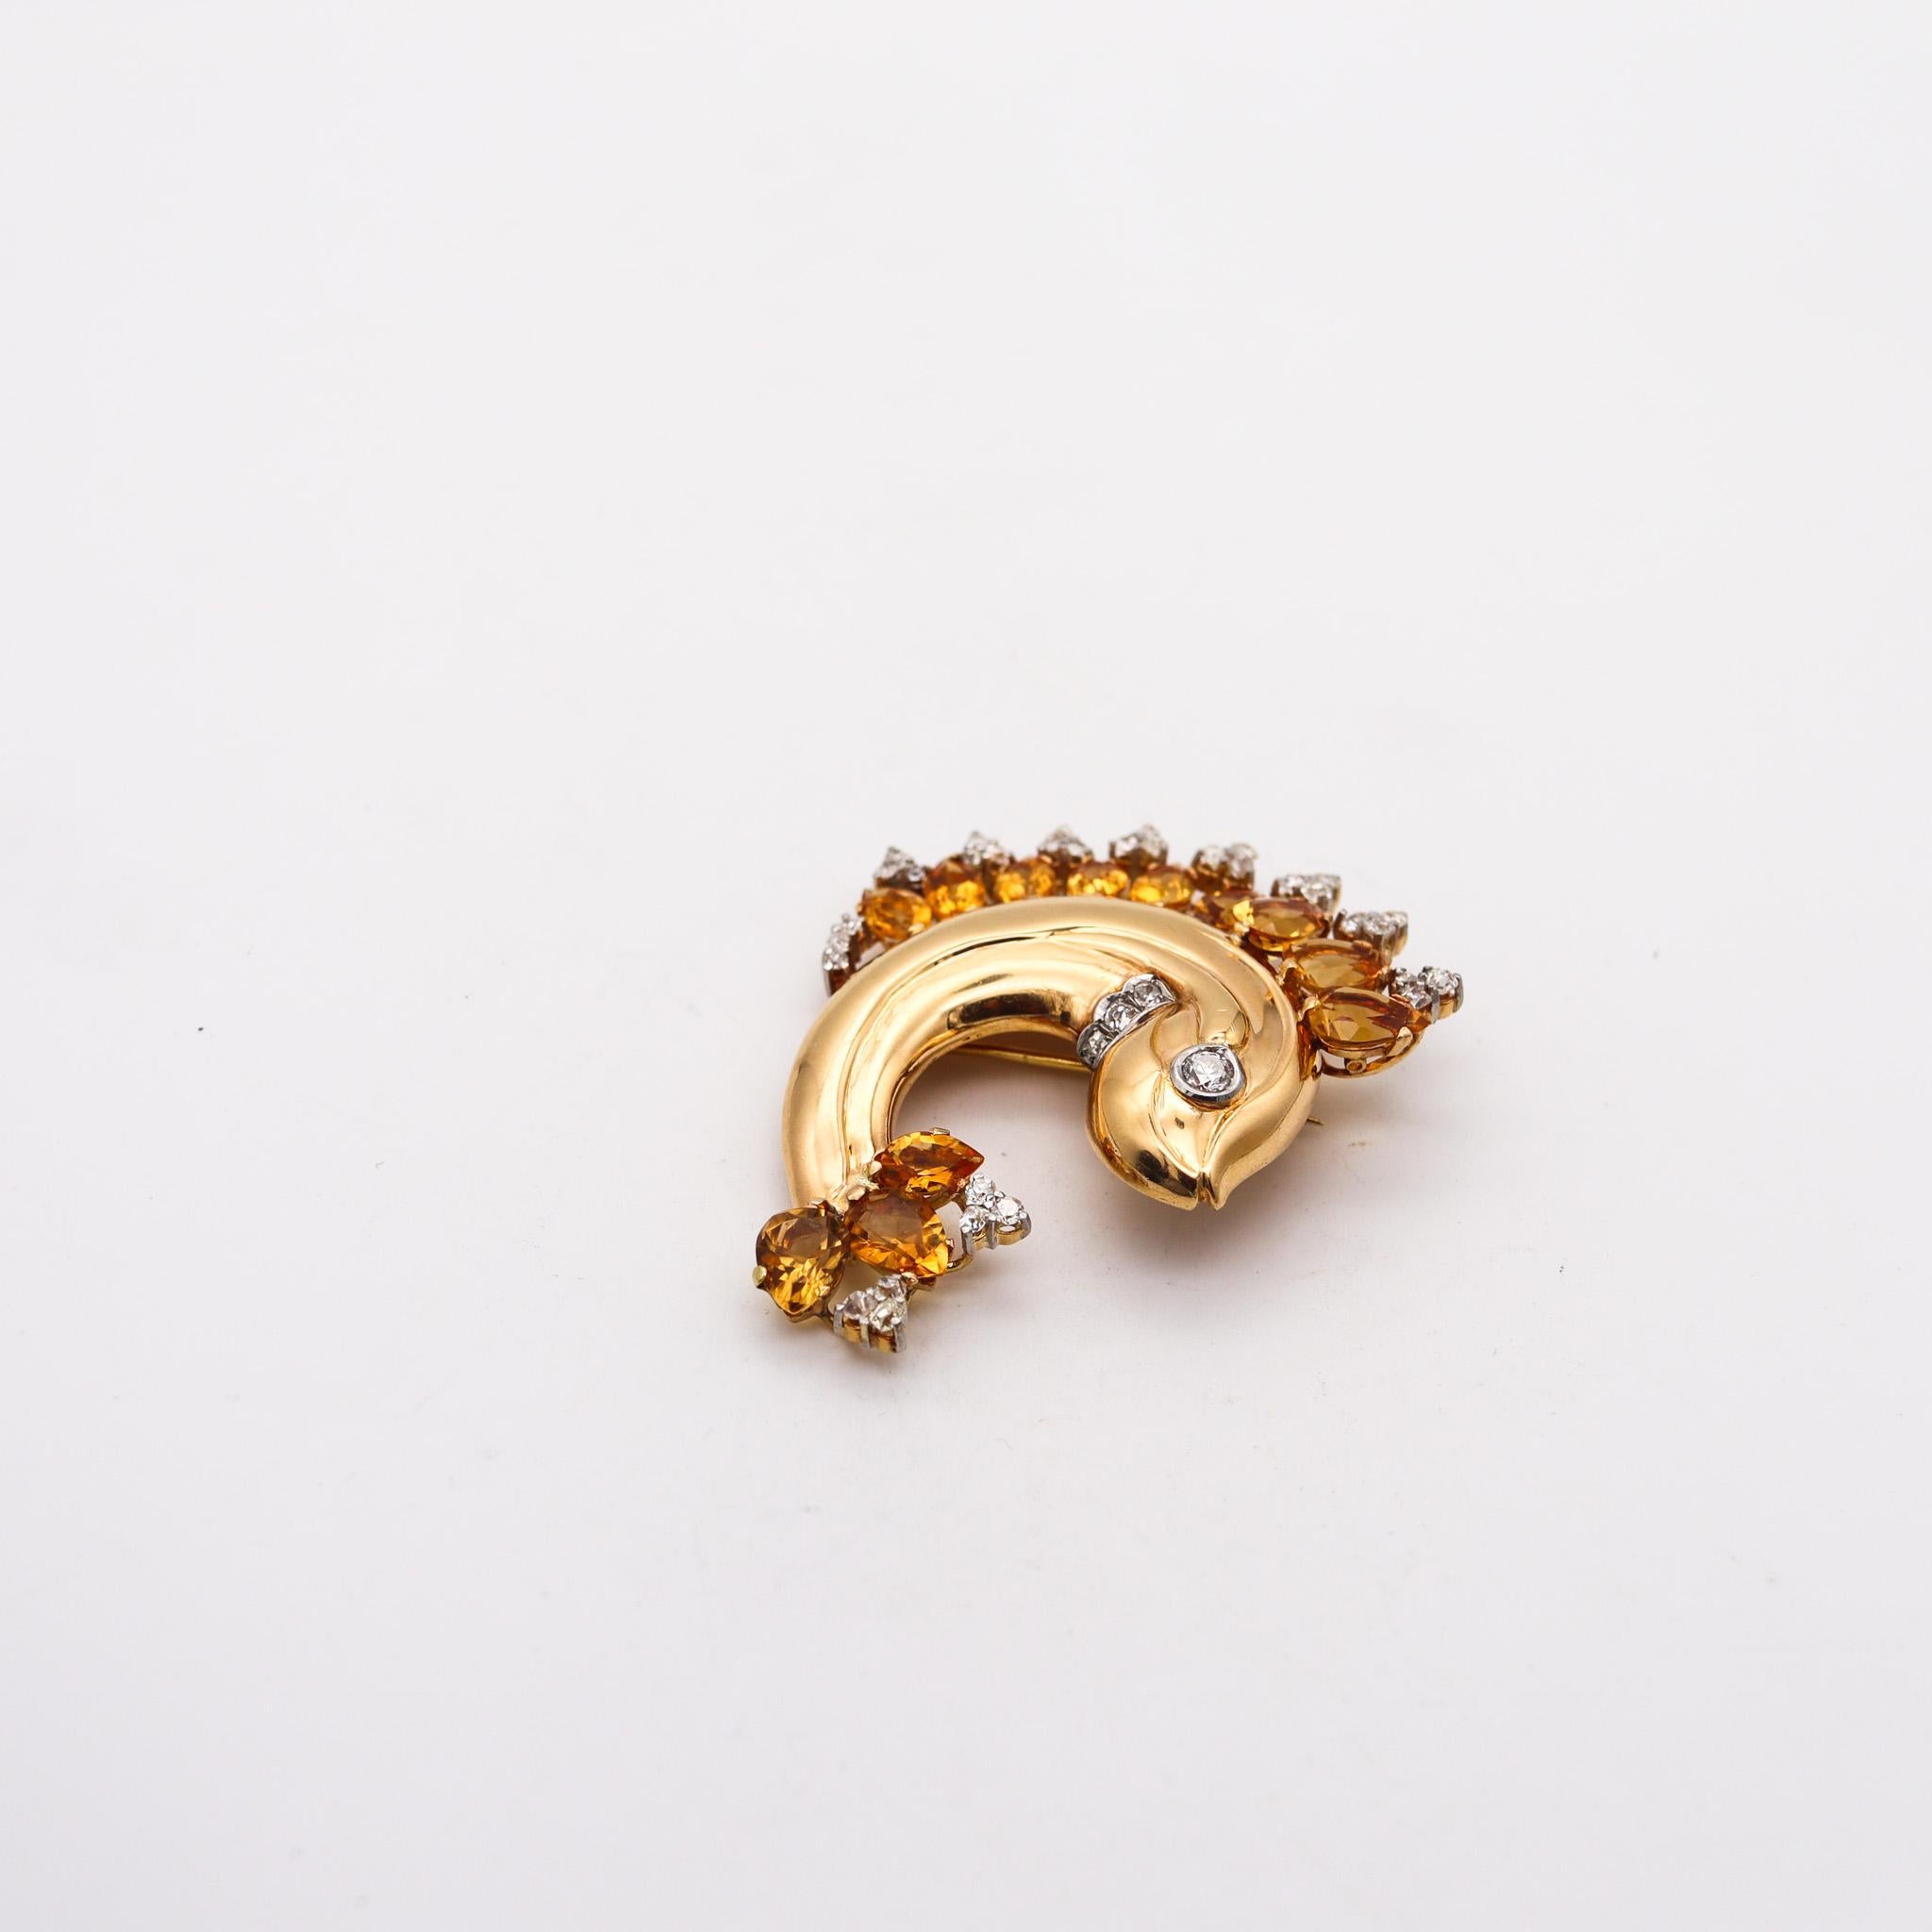 An art deco brooch made in Austria.

An amazing brooch in the shape of a stylized fish, created in Vienna Austria during the art deco period, back in the 1930. This brooch has been crafted with an amazing construction in solid yellow gold of 18